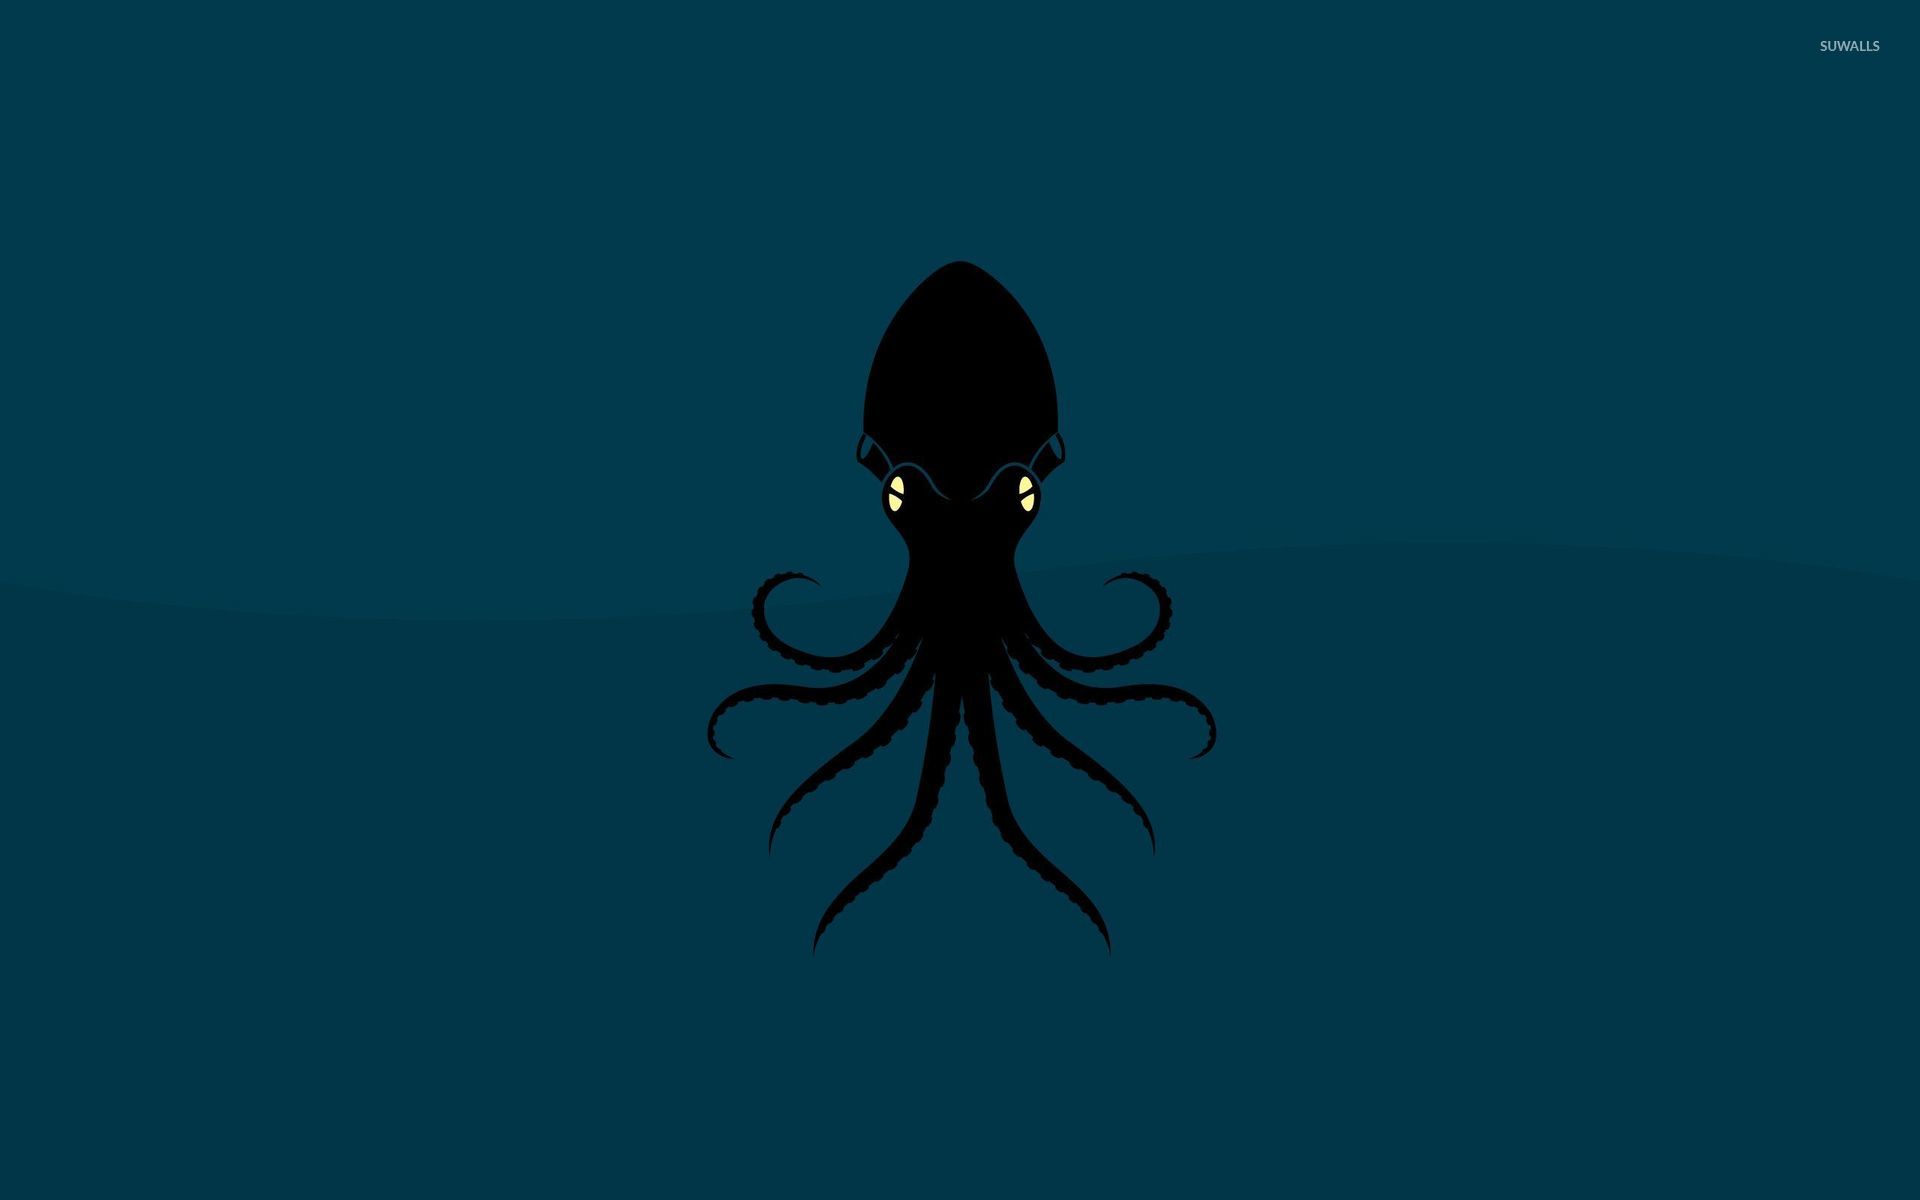 SQUID WALLPAPERS FREE Wallpapers Background images   hippowallpapers